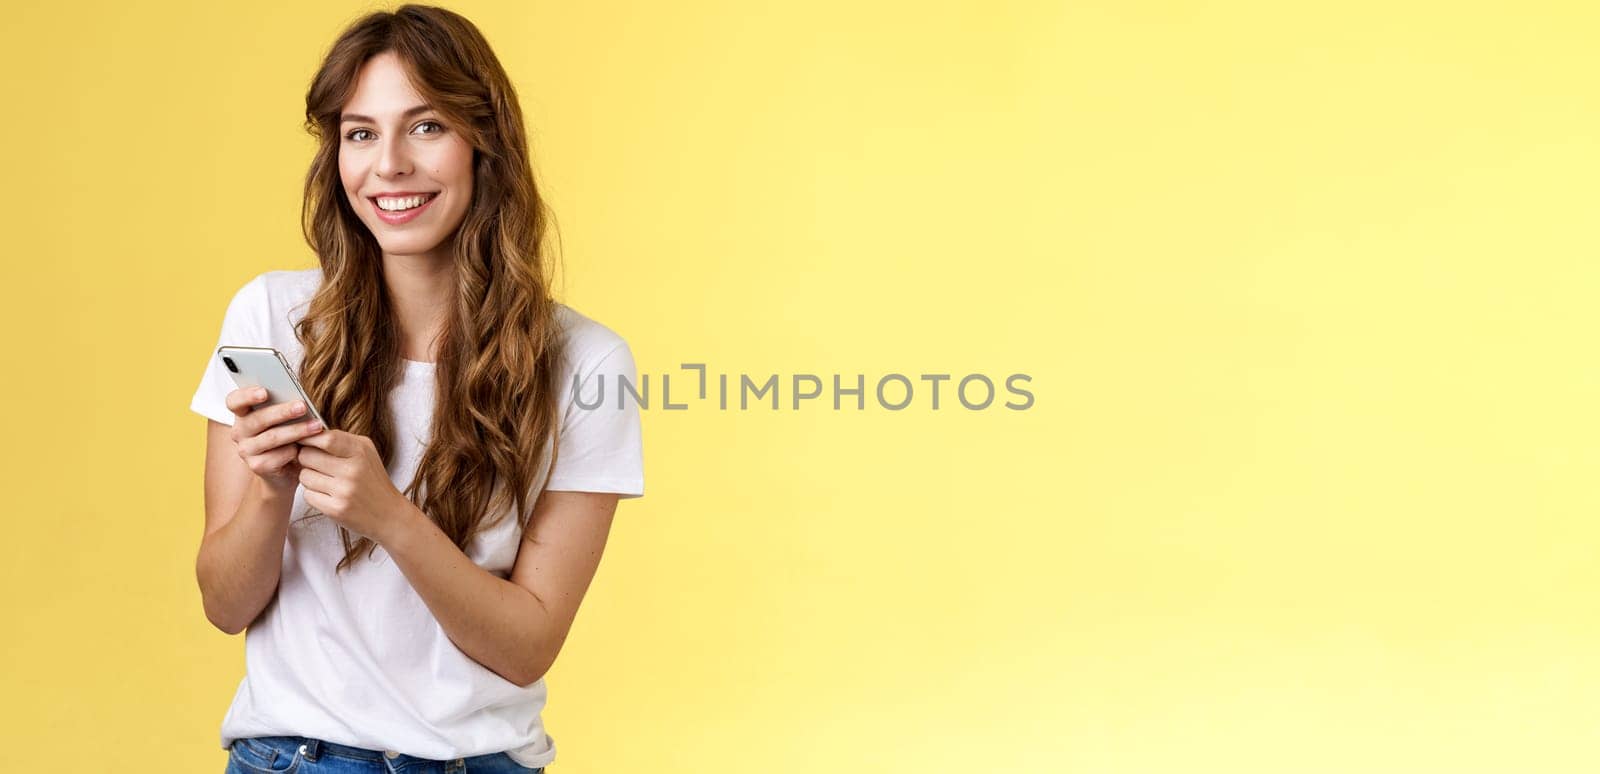 Enthusiastic good-looking urban girl wear white t-shirt standing casual smiling delighted camera texting hold smartphone scroll social media feed stand yellow background browsing network. Lifestyle.